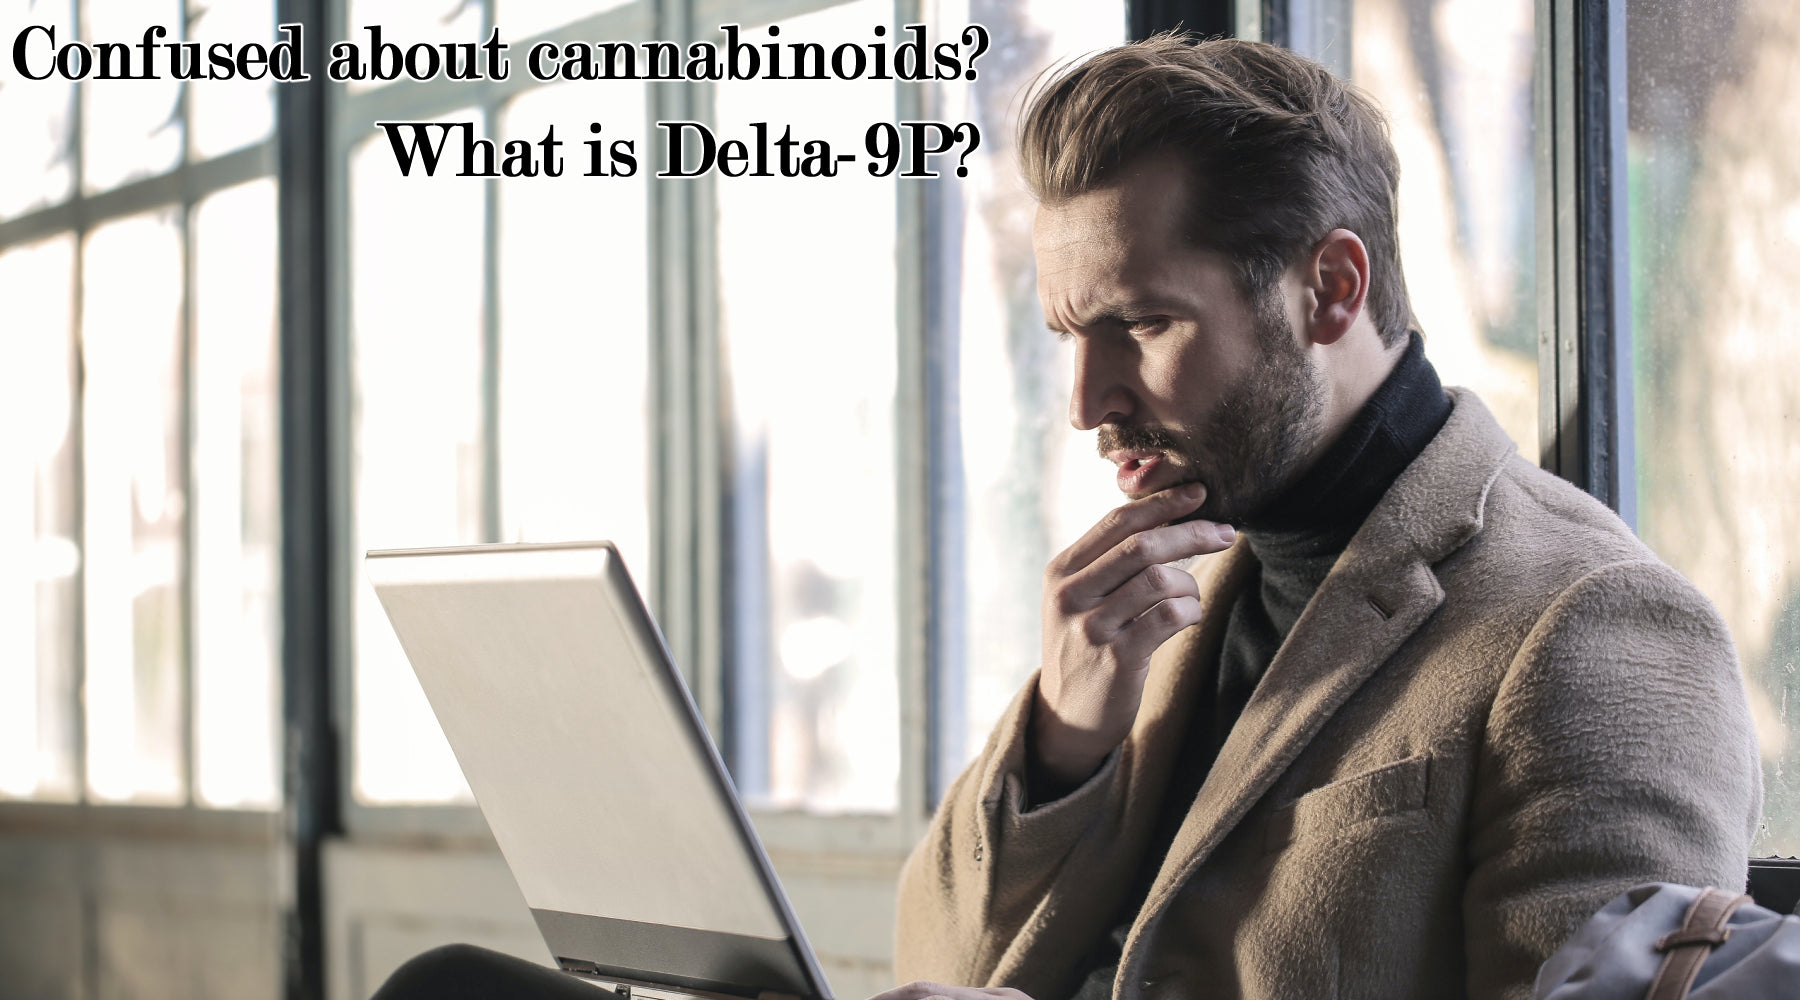 What is Delta-9P?